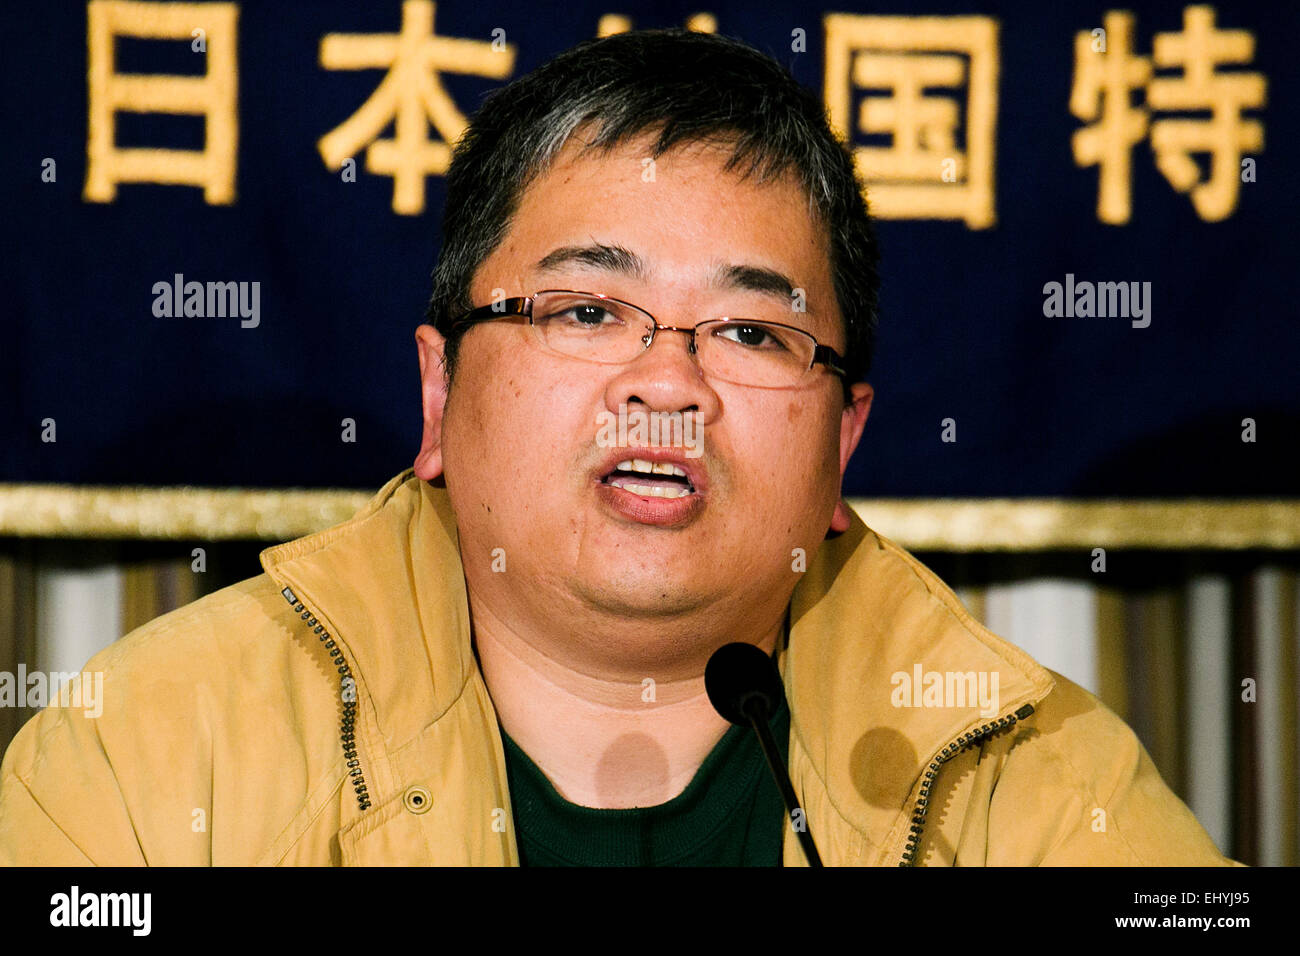 Tokyo, Japan. 19th March, 2015. Film director Atsushi Sakahara speaks during a press conference at the Foreign Correspondents' Club of Japan on March 19, 2015, Tokyo, Japan. Sakahara is a survivor of the 1995 Tokyo Subway sarin gas attack. After surviving the attack he left Japan and went to the US to became a filmmaker. March 20th will be the 20th anniversary of the attack and Sakahara met the media to discuss his documentary 'A picture' whose subject matter is 'Aleph'. Credit:  Aflo Co. Ltd./Alamy Live News Stock Photo